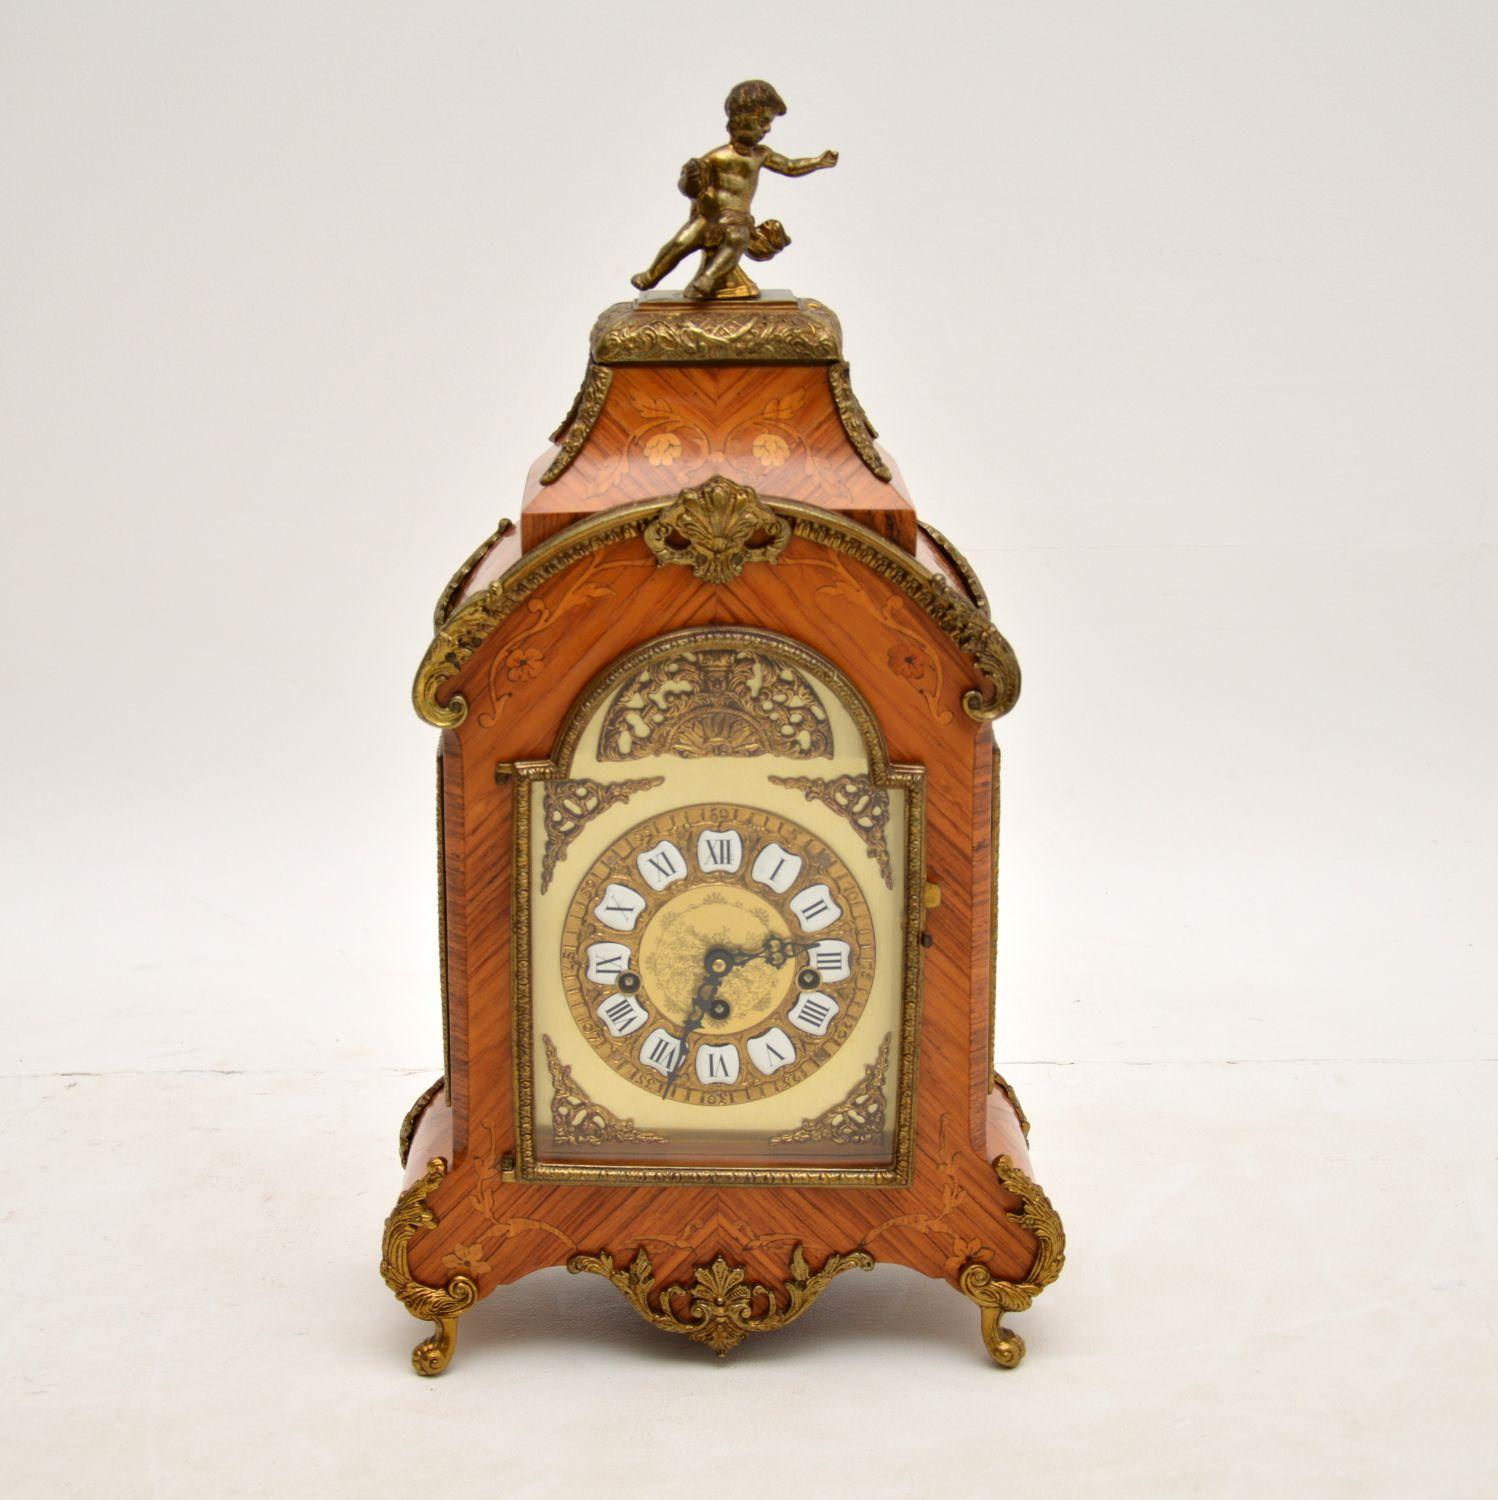 A stunning mantel clock in the classic antique French style. This was made in France & it dates from around the 1950’s period.

The quality is fabulous, it is beautifully constructed from kingwood & other various inlaid woods. This clock has